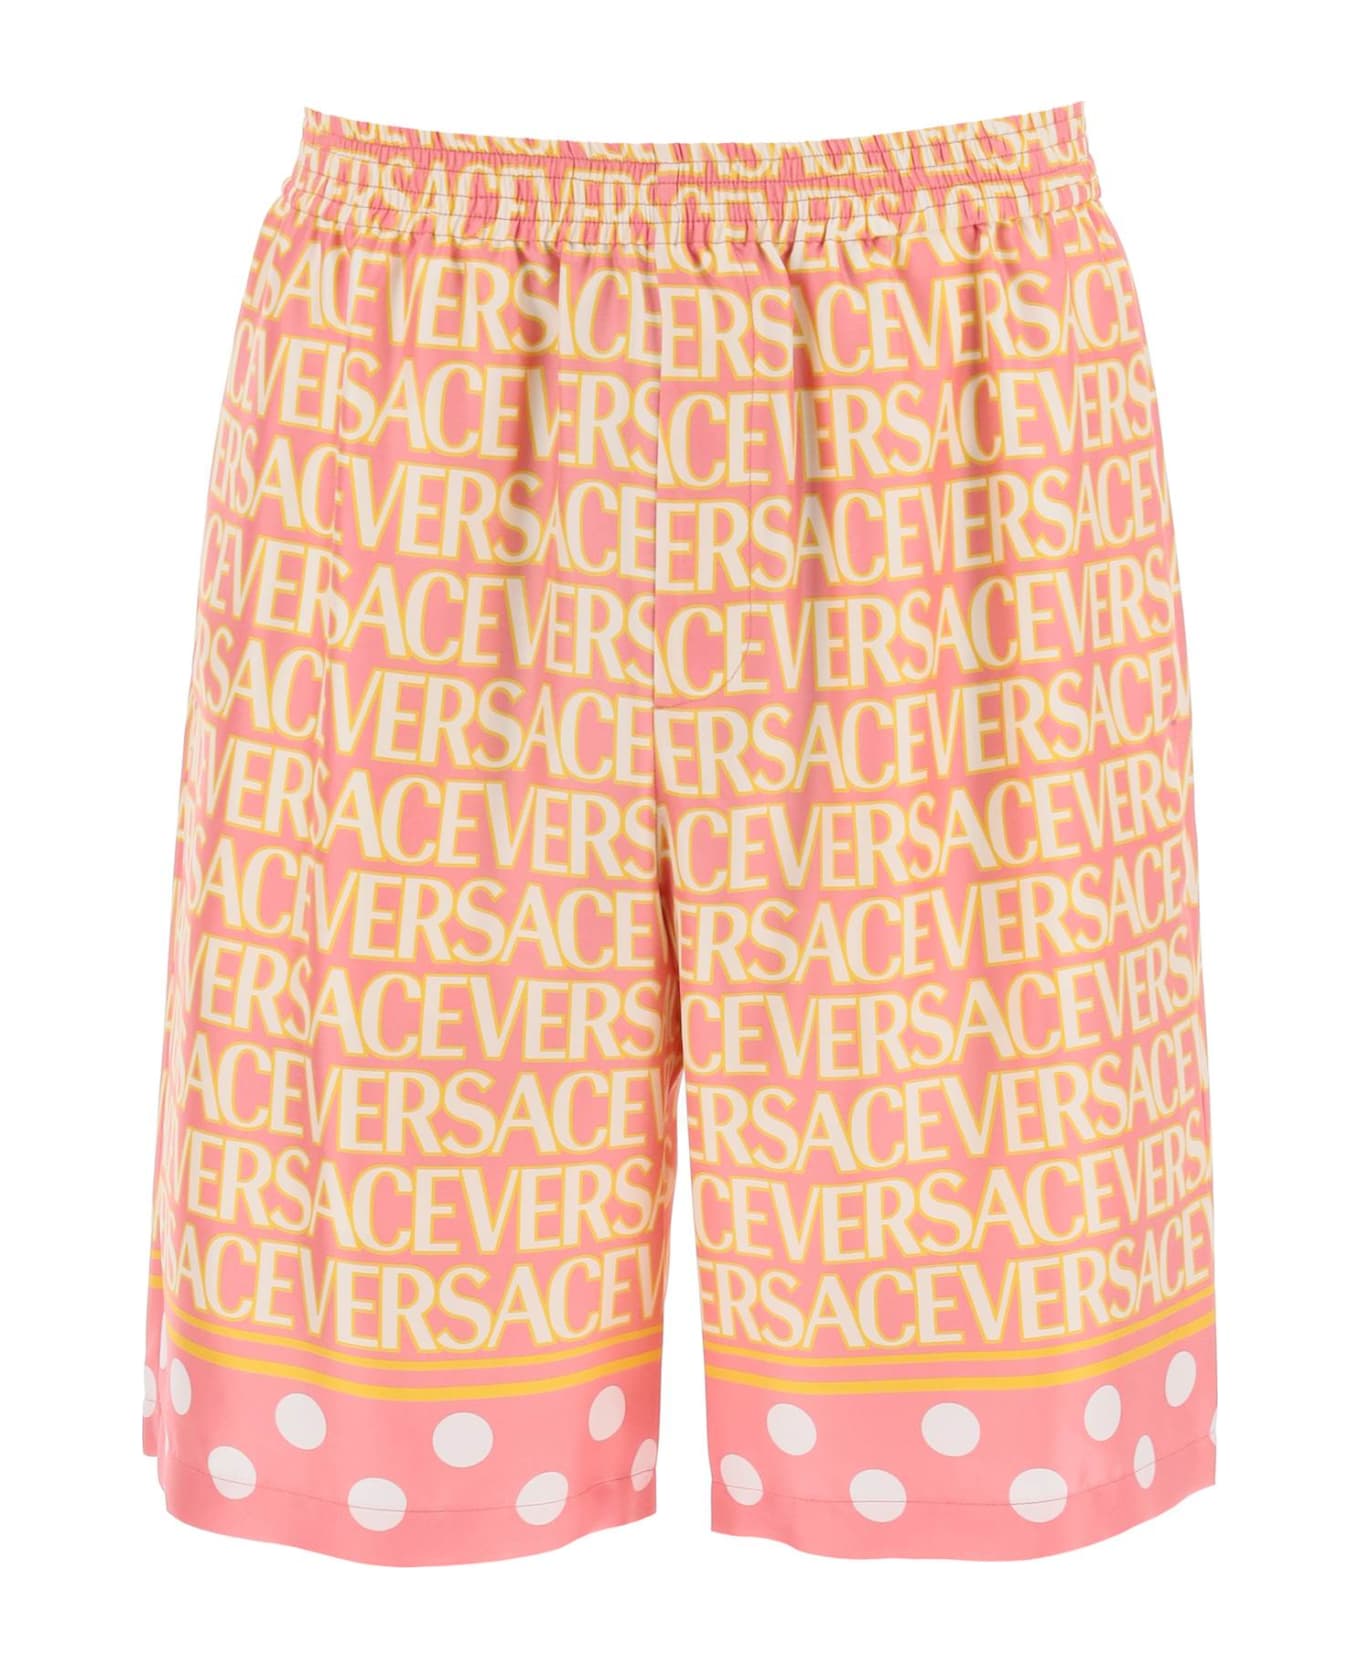 Versace Allover Silk Shorts - Pink ivory